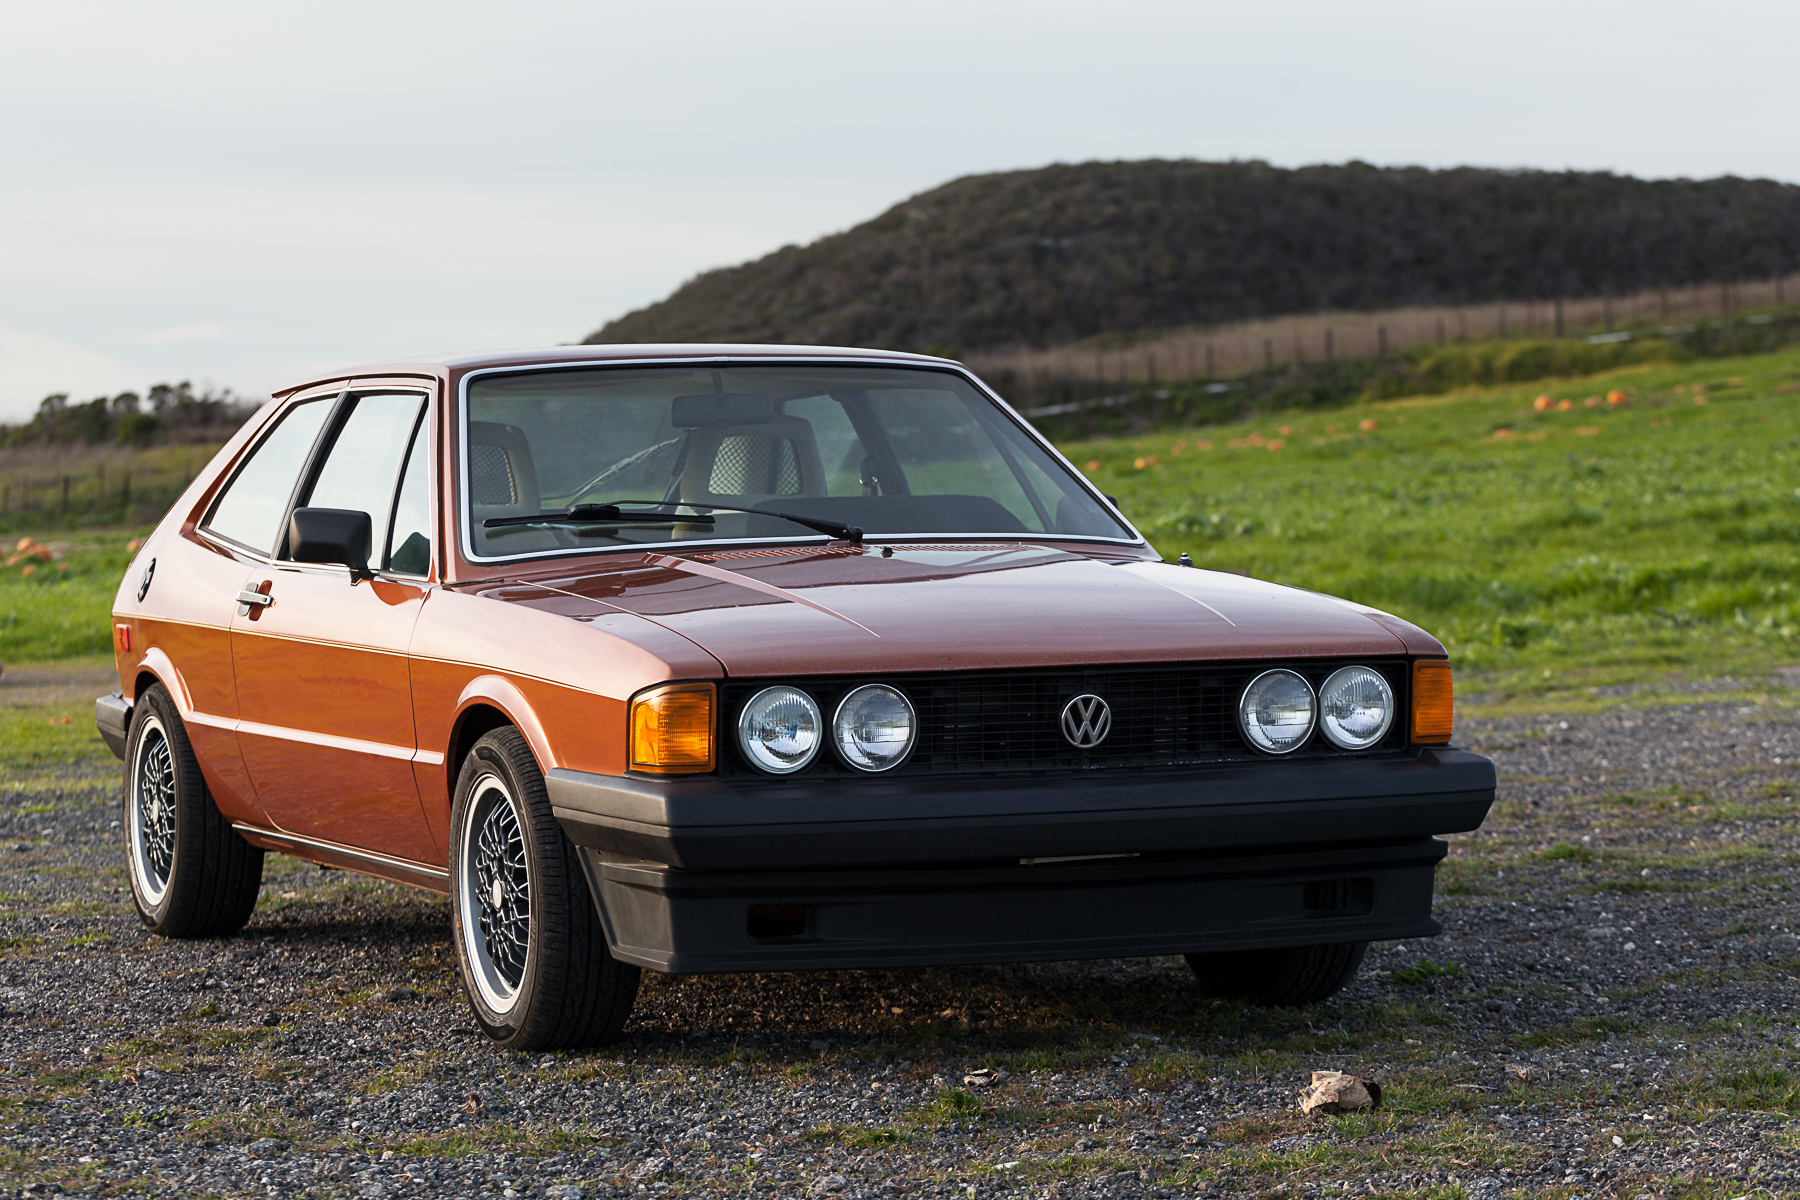 Project 'Penny' / 1980 VW Scirocco — DWA!